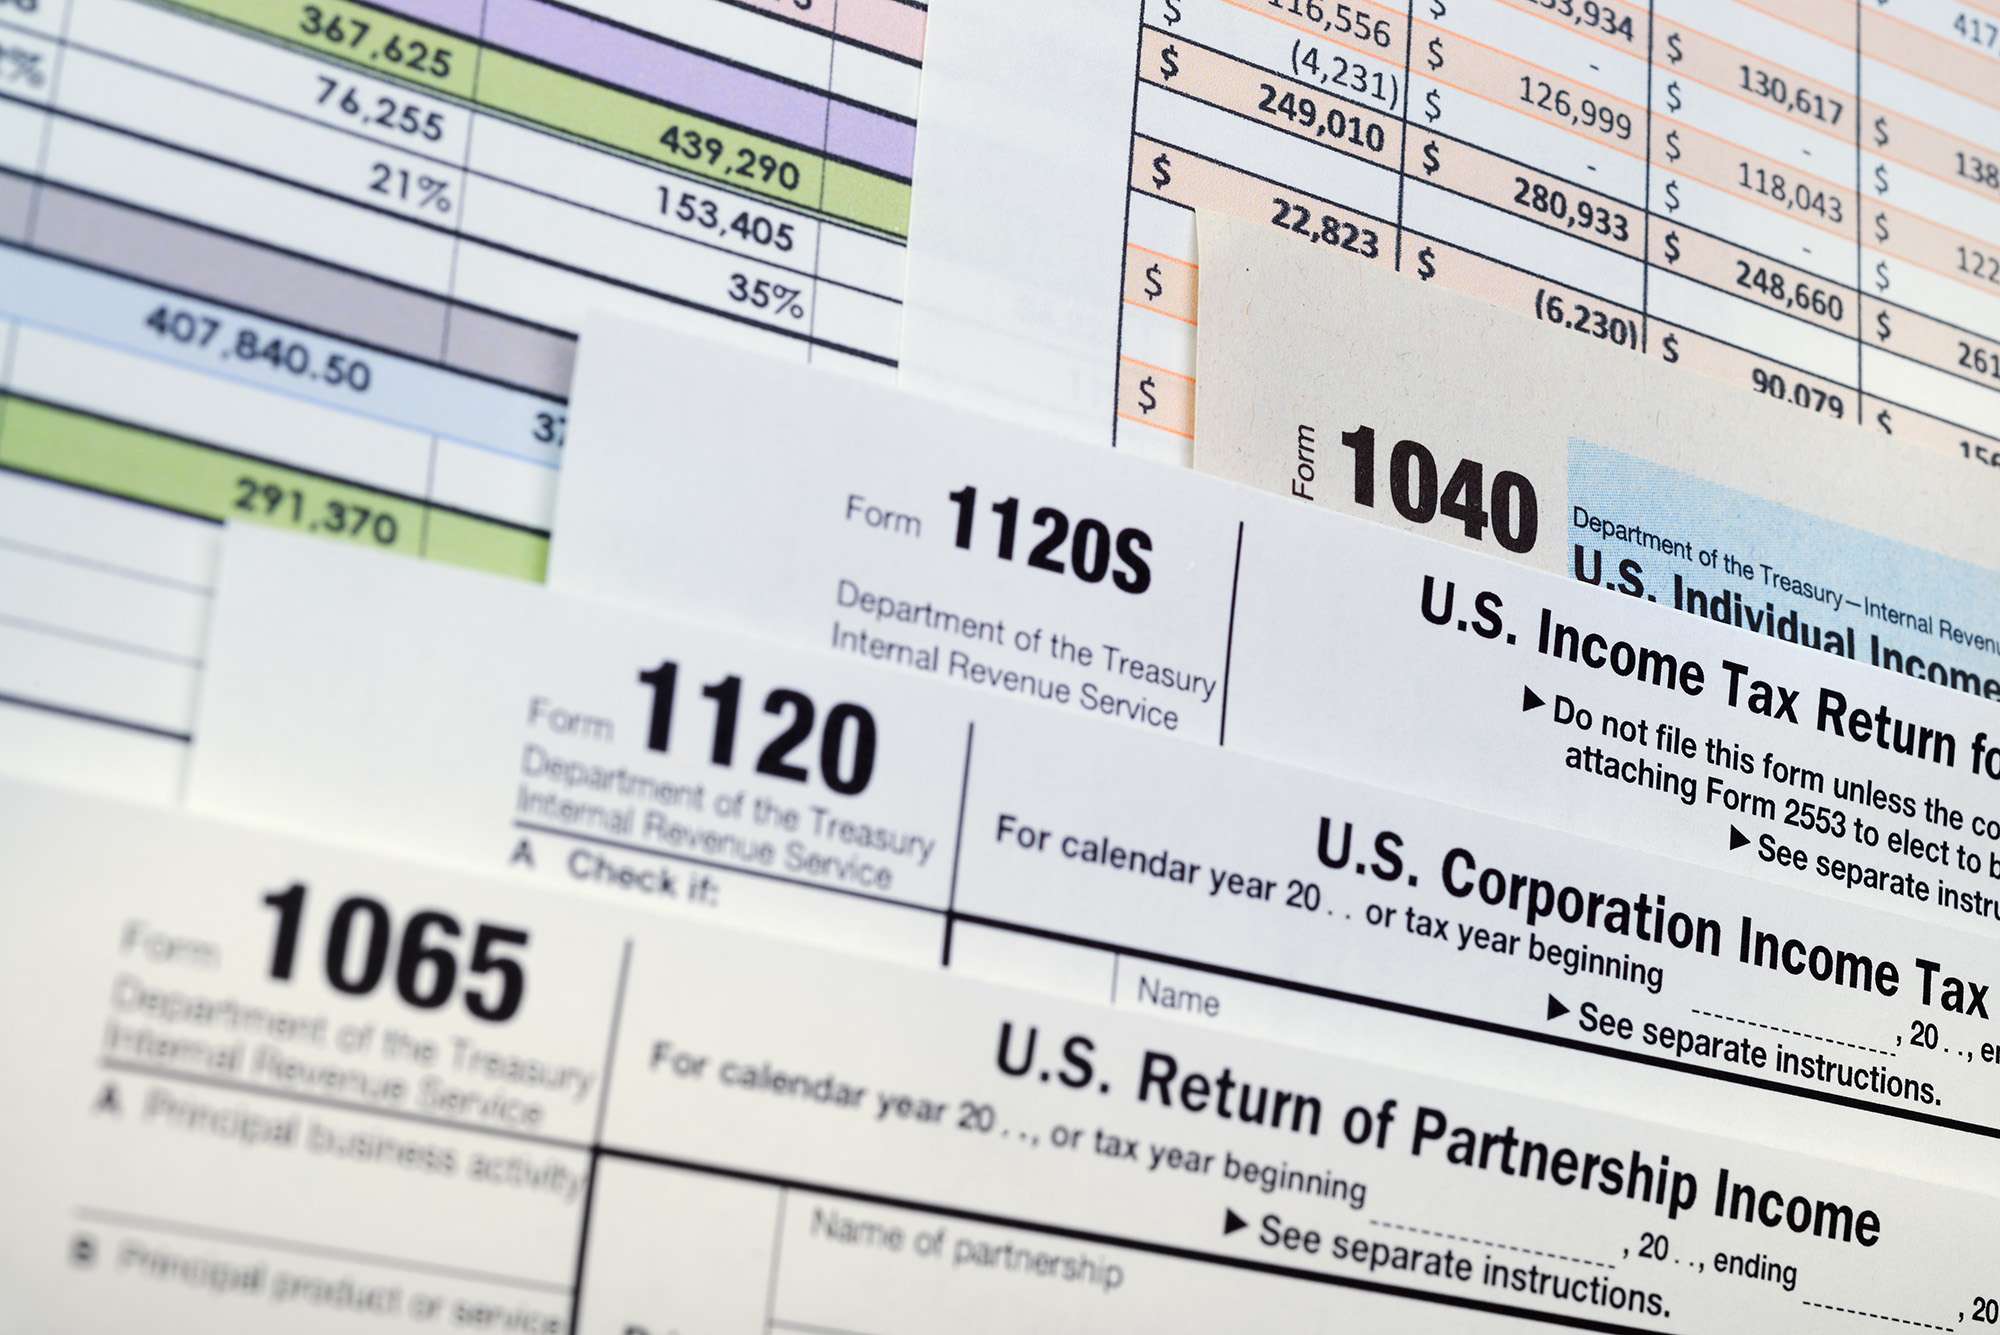 Tax forms - an EIN helps house cleaning companies comply with federal tax regulations